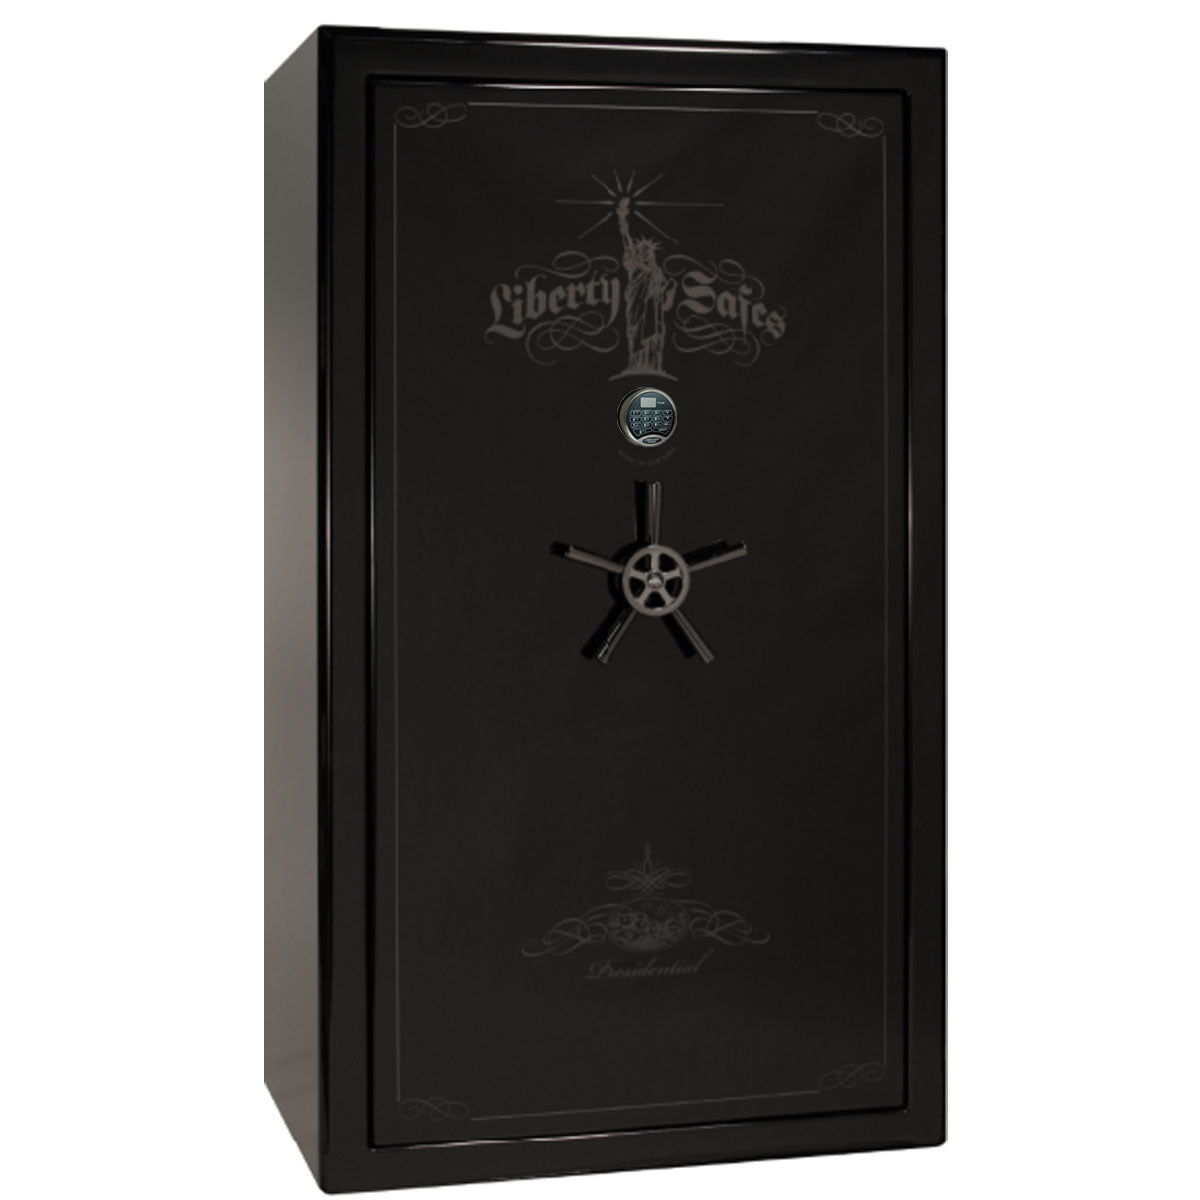 Liberty Safe Presidential 50 in Black Gloss with Black Chrome Electronic Lock, closed door.